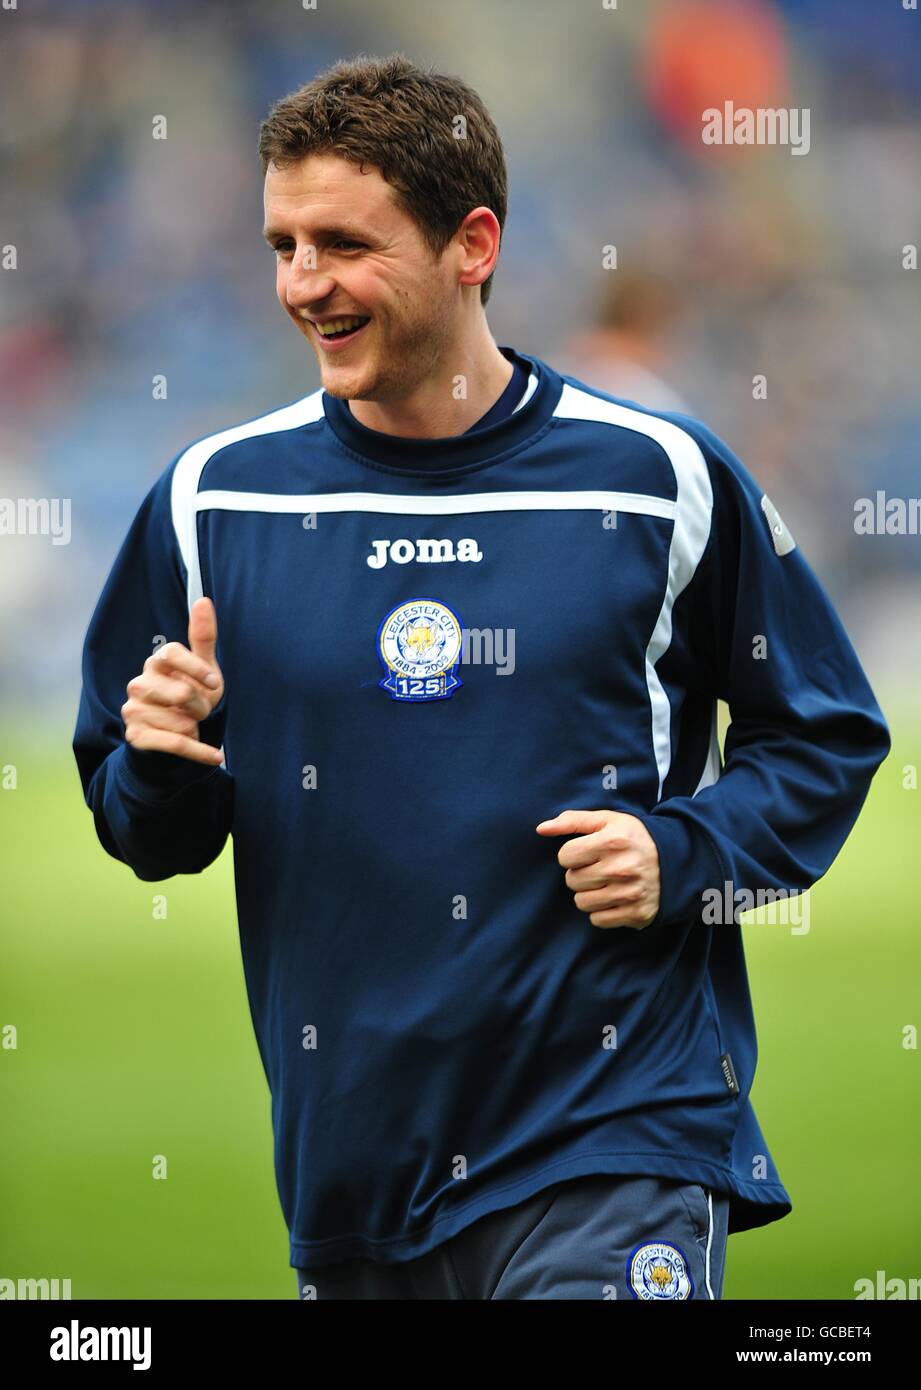 Fußball - Coca-Cola Football League Championship - Leicester City / Nottingham Forest - The Walkers Stadium. Alex Bruce, Leicester City Stockfoto